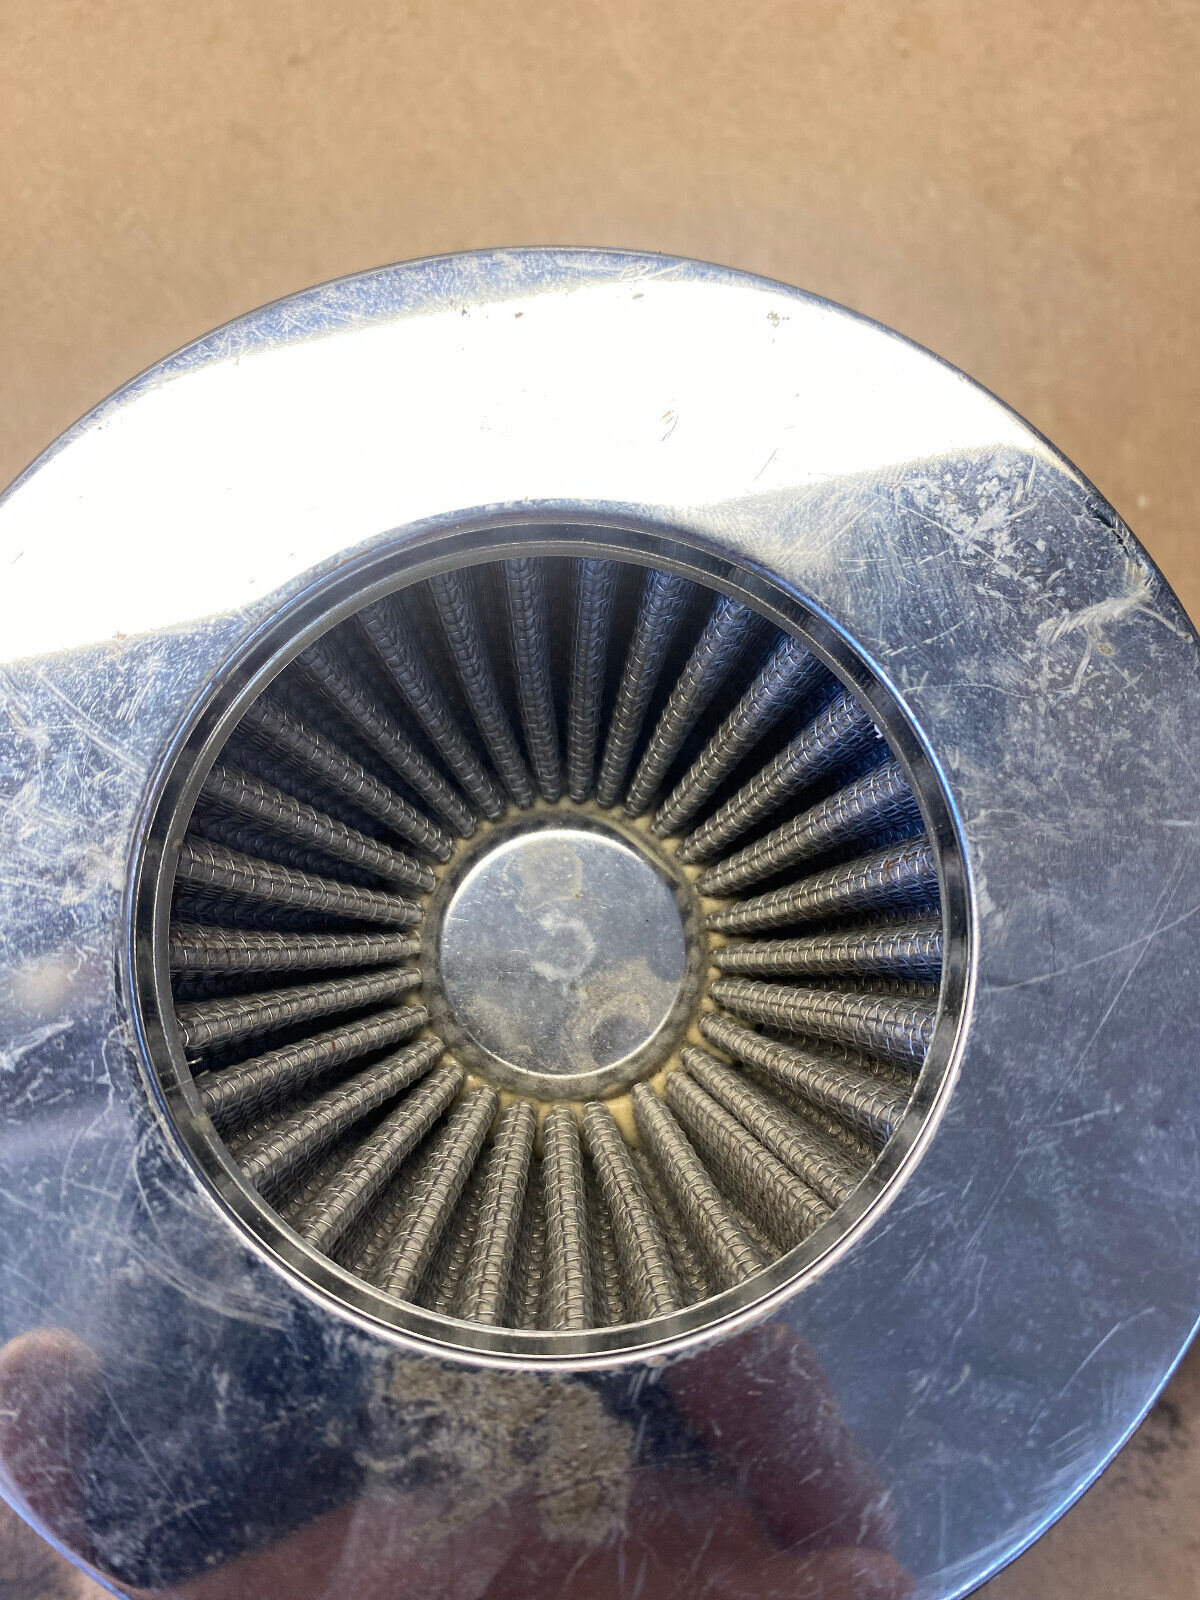 Harley-davidson  Air Cleaner Cover with Filter